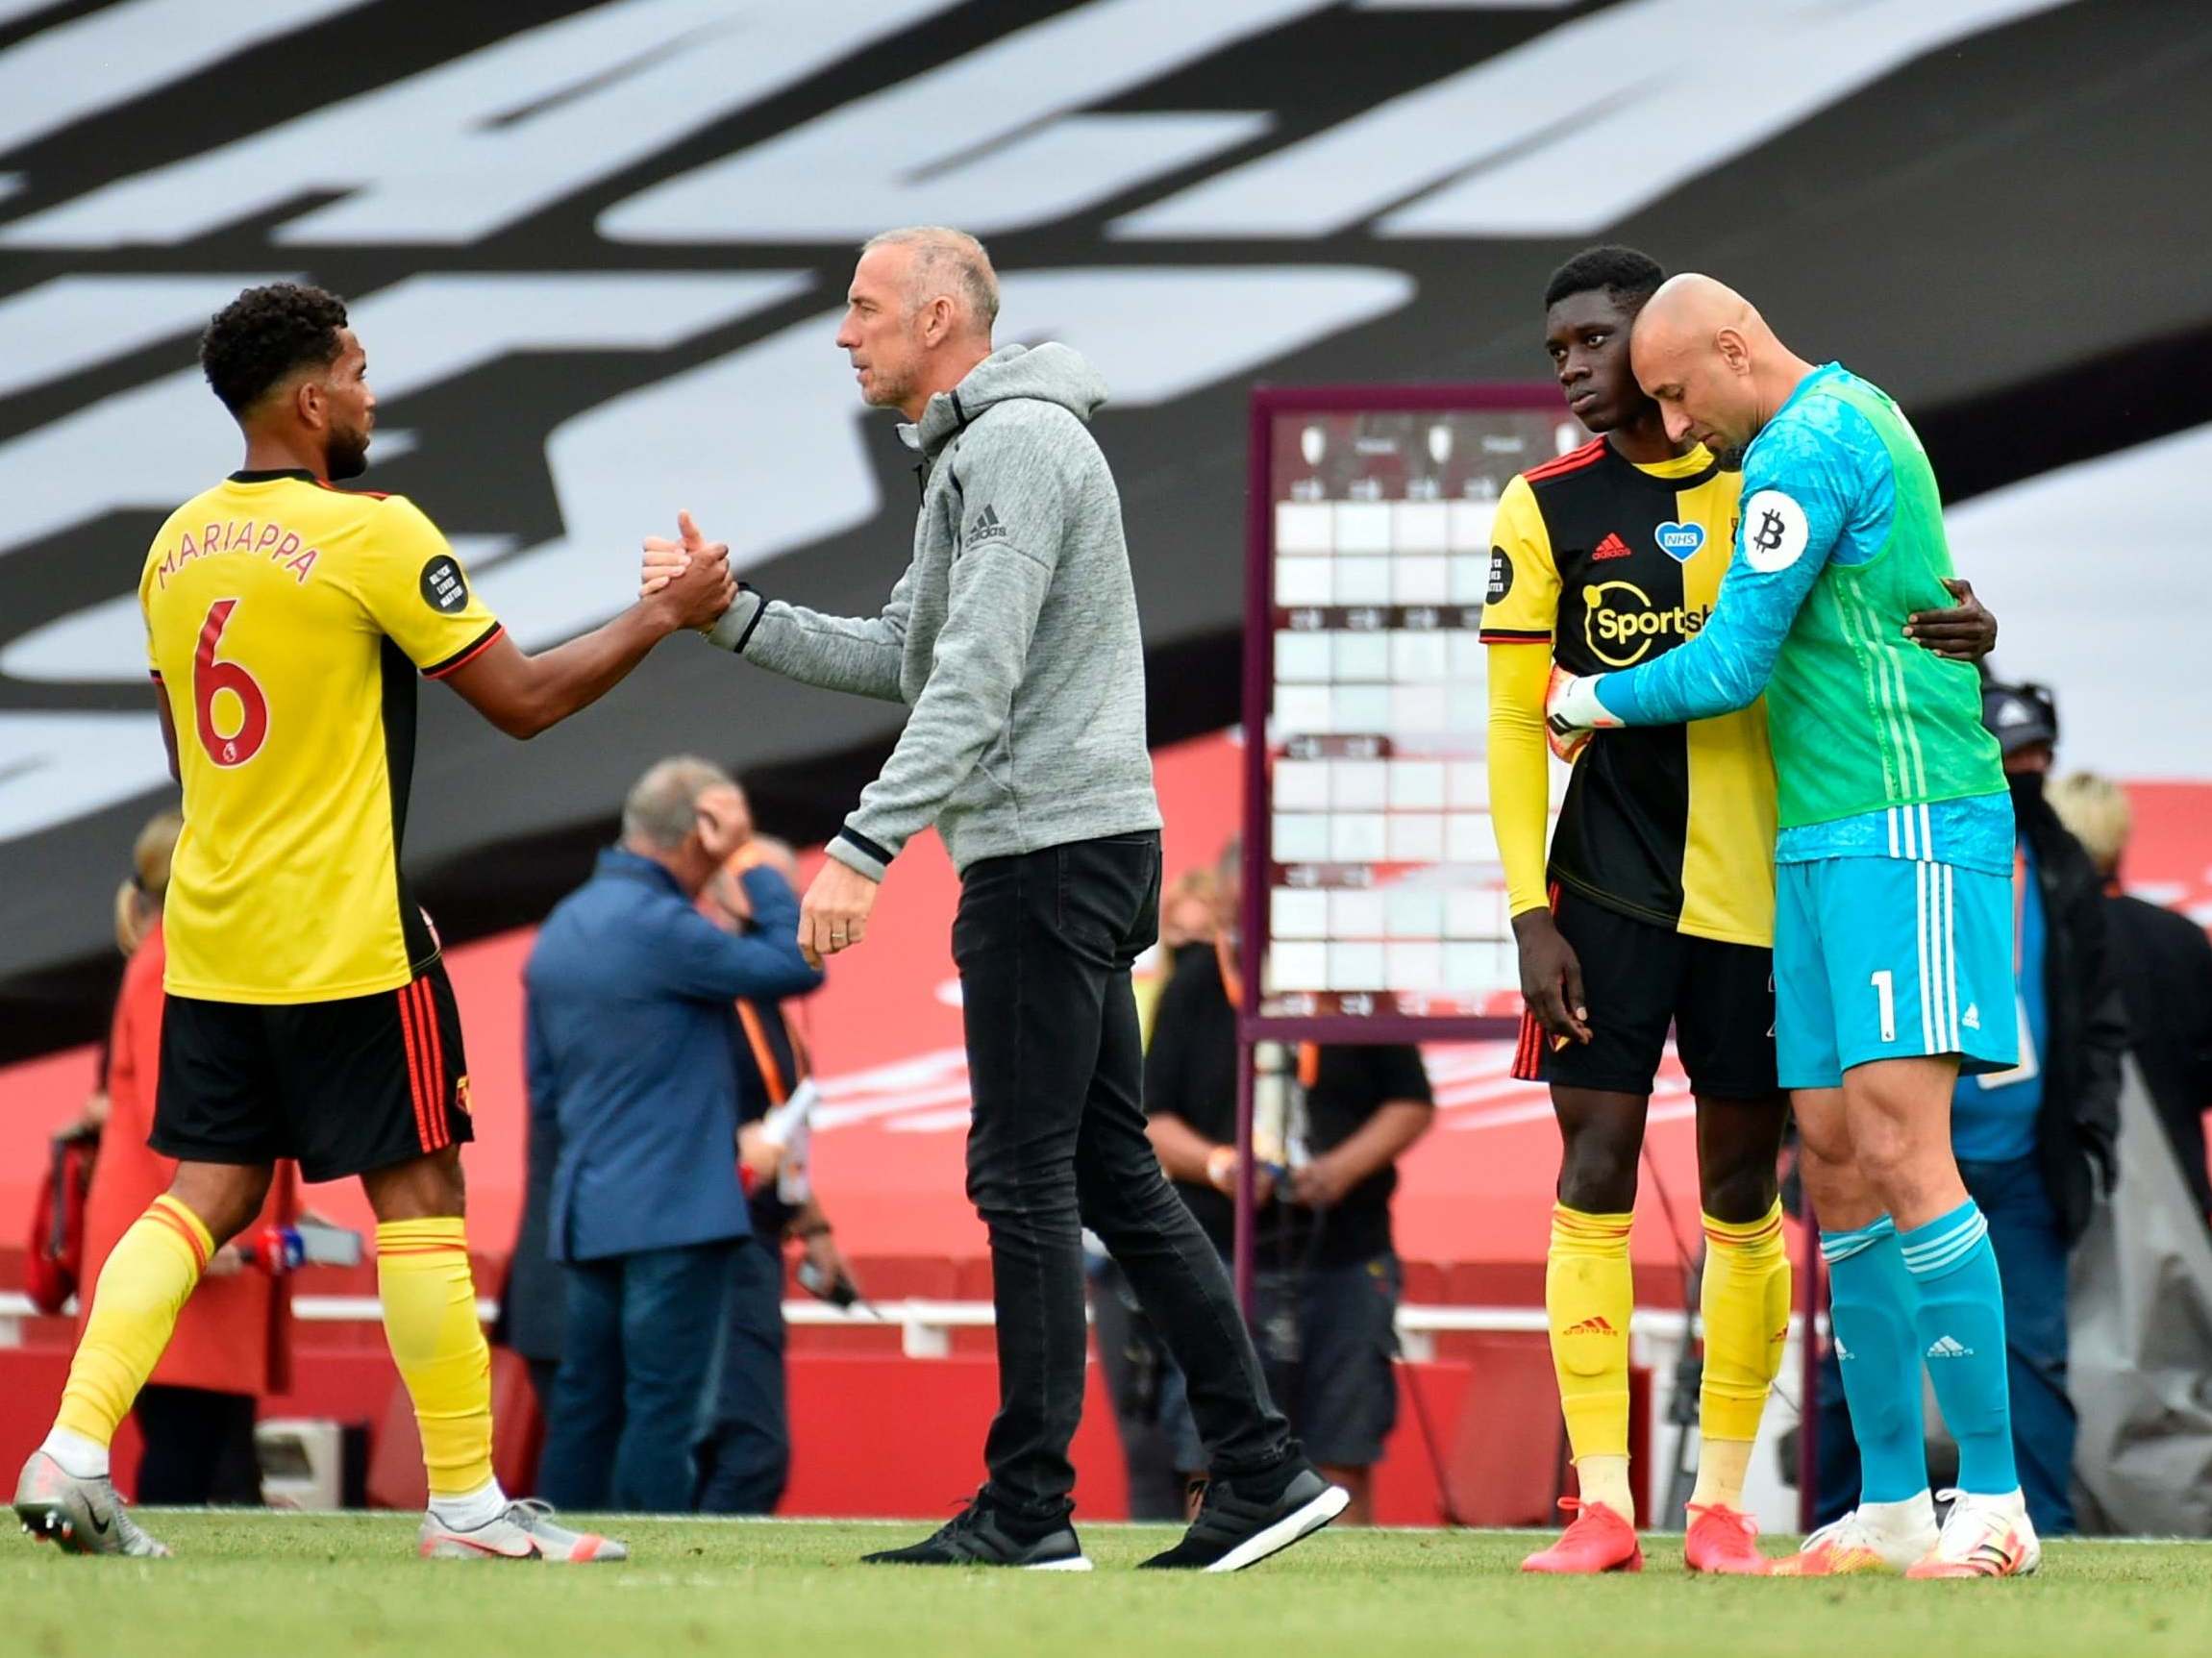 Watford players and staff console each other after relegation was confirmed